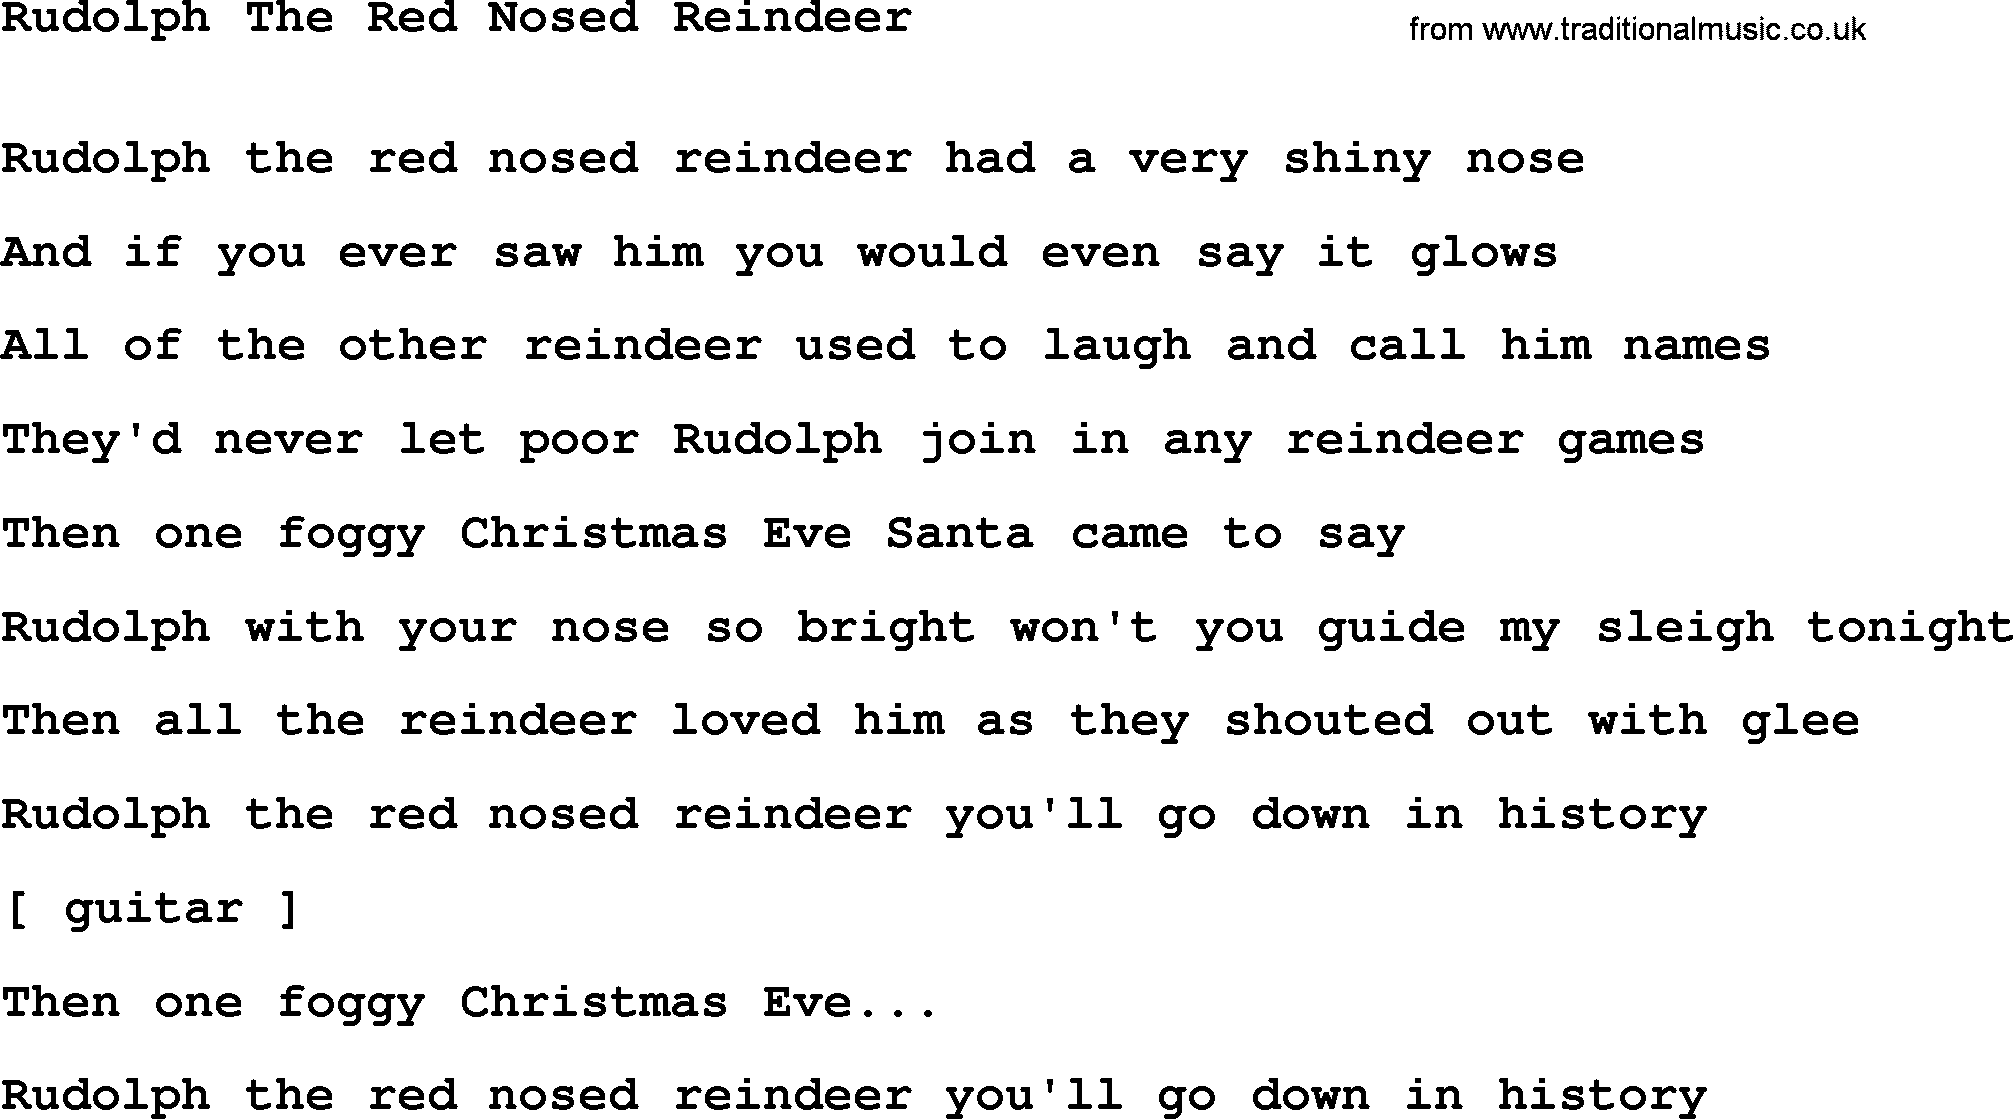 Willie Nelson song: Rudolph The Red Nosed Reindeer lyrics